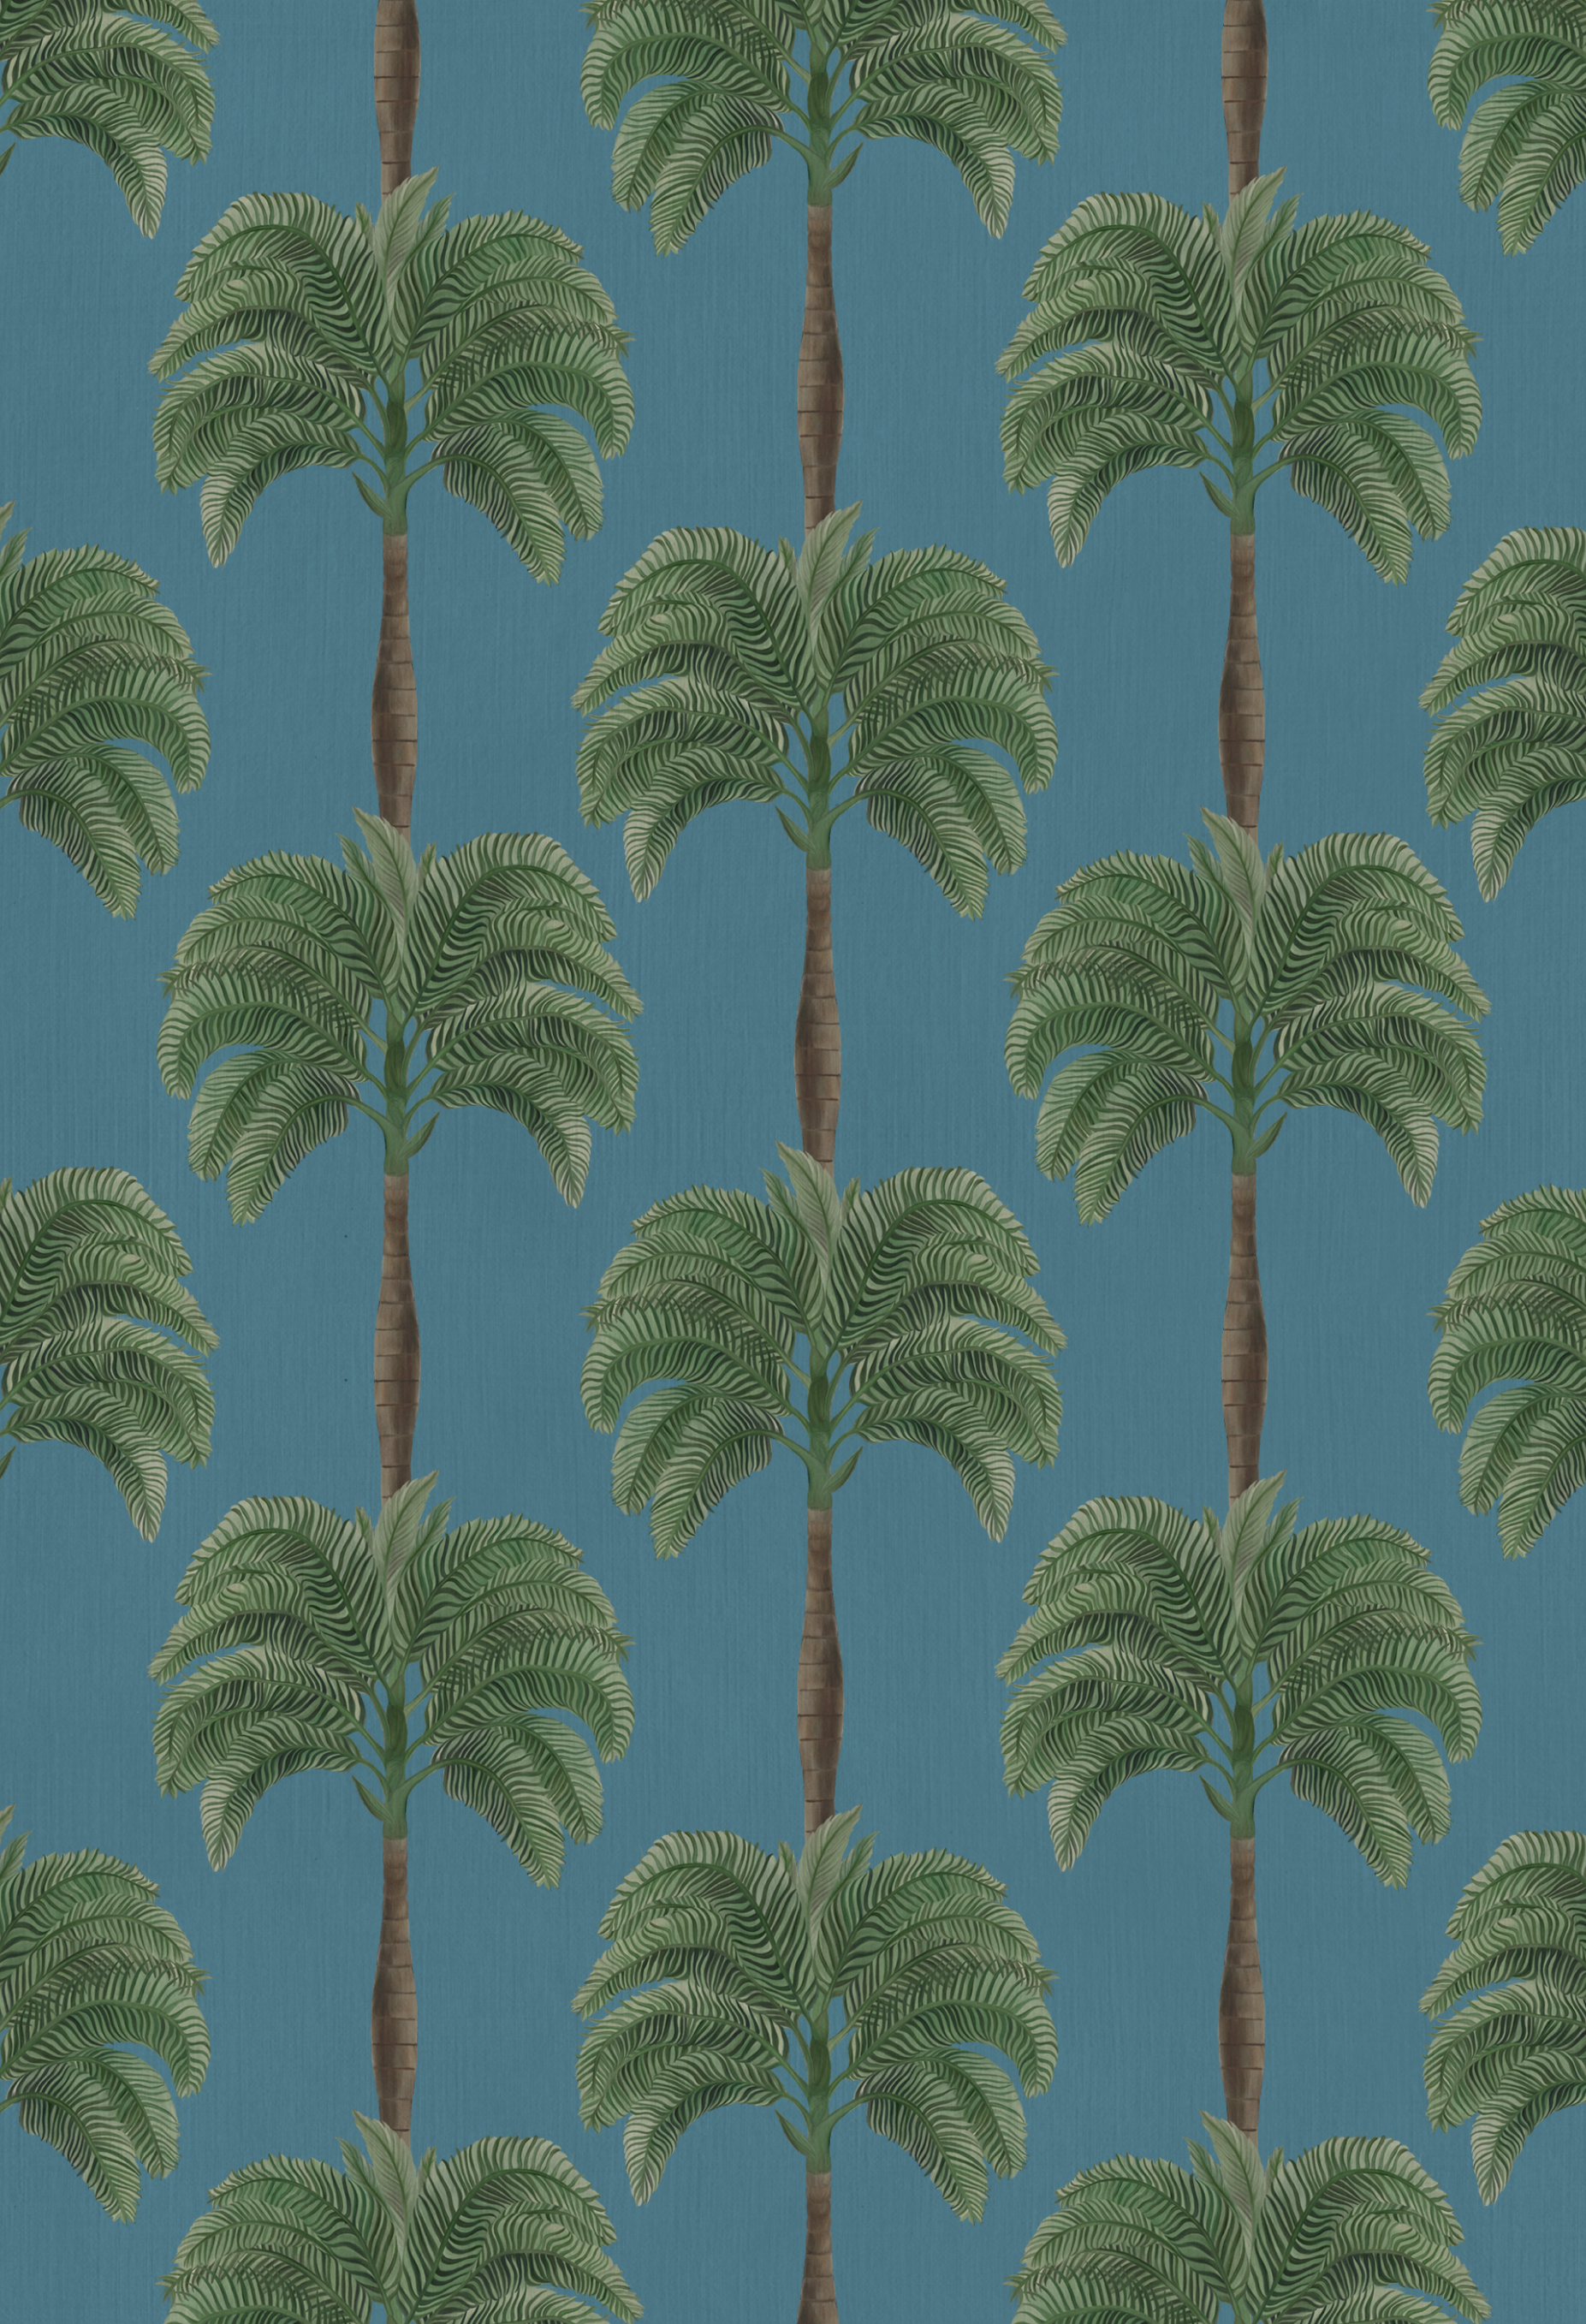 Luxurious Little Palma Wallpaper in Lagoon by Deus ex Gardenia with a botanical palm tree pattern on a blue background.